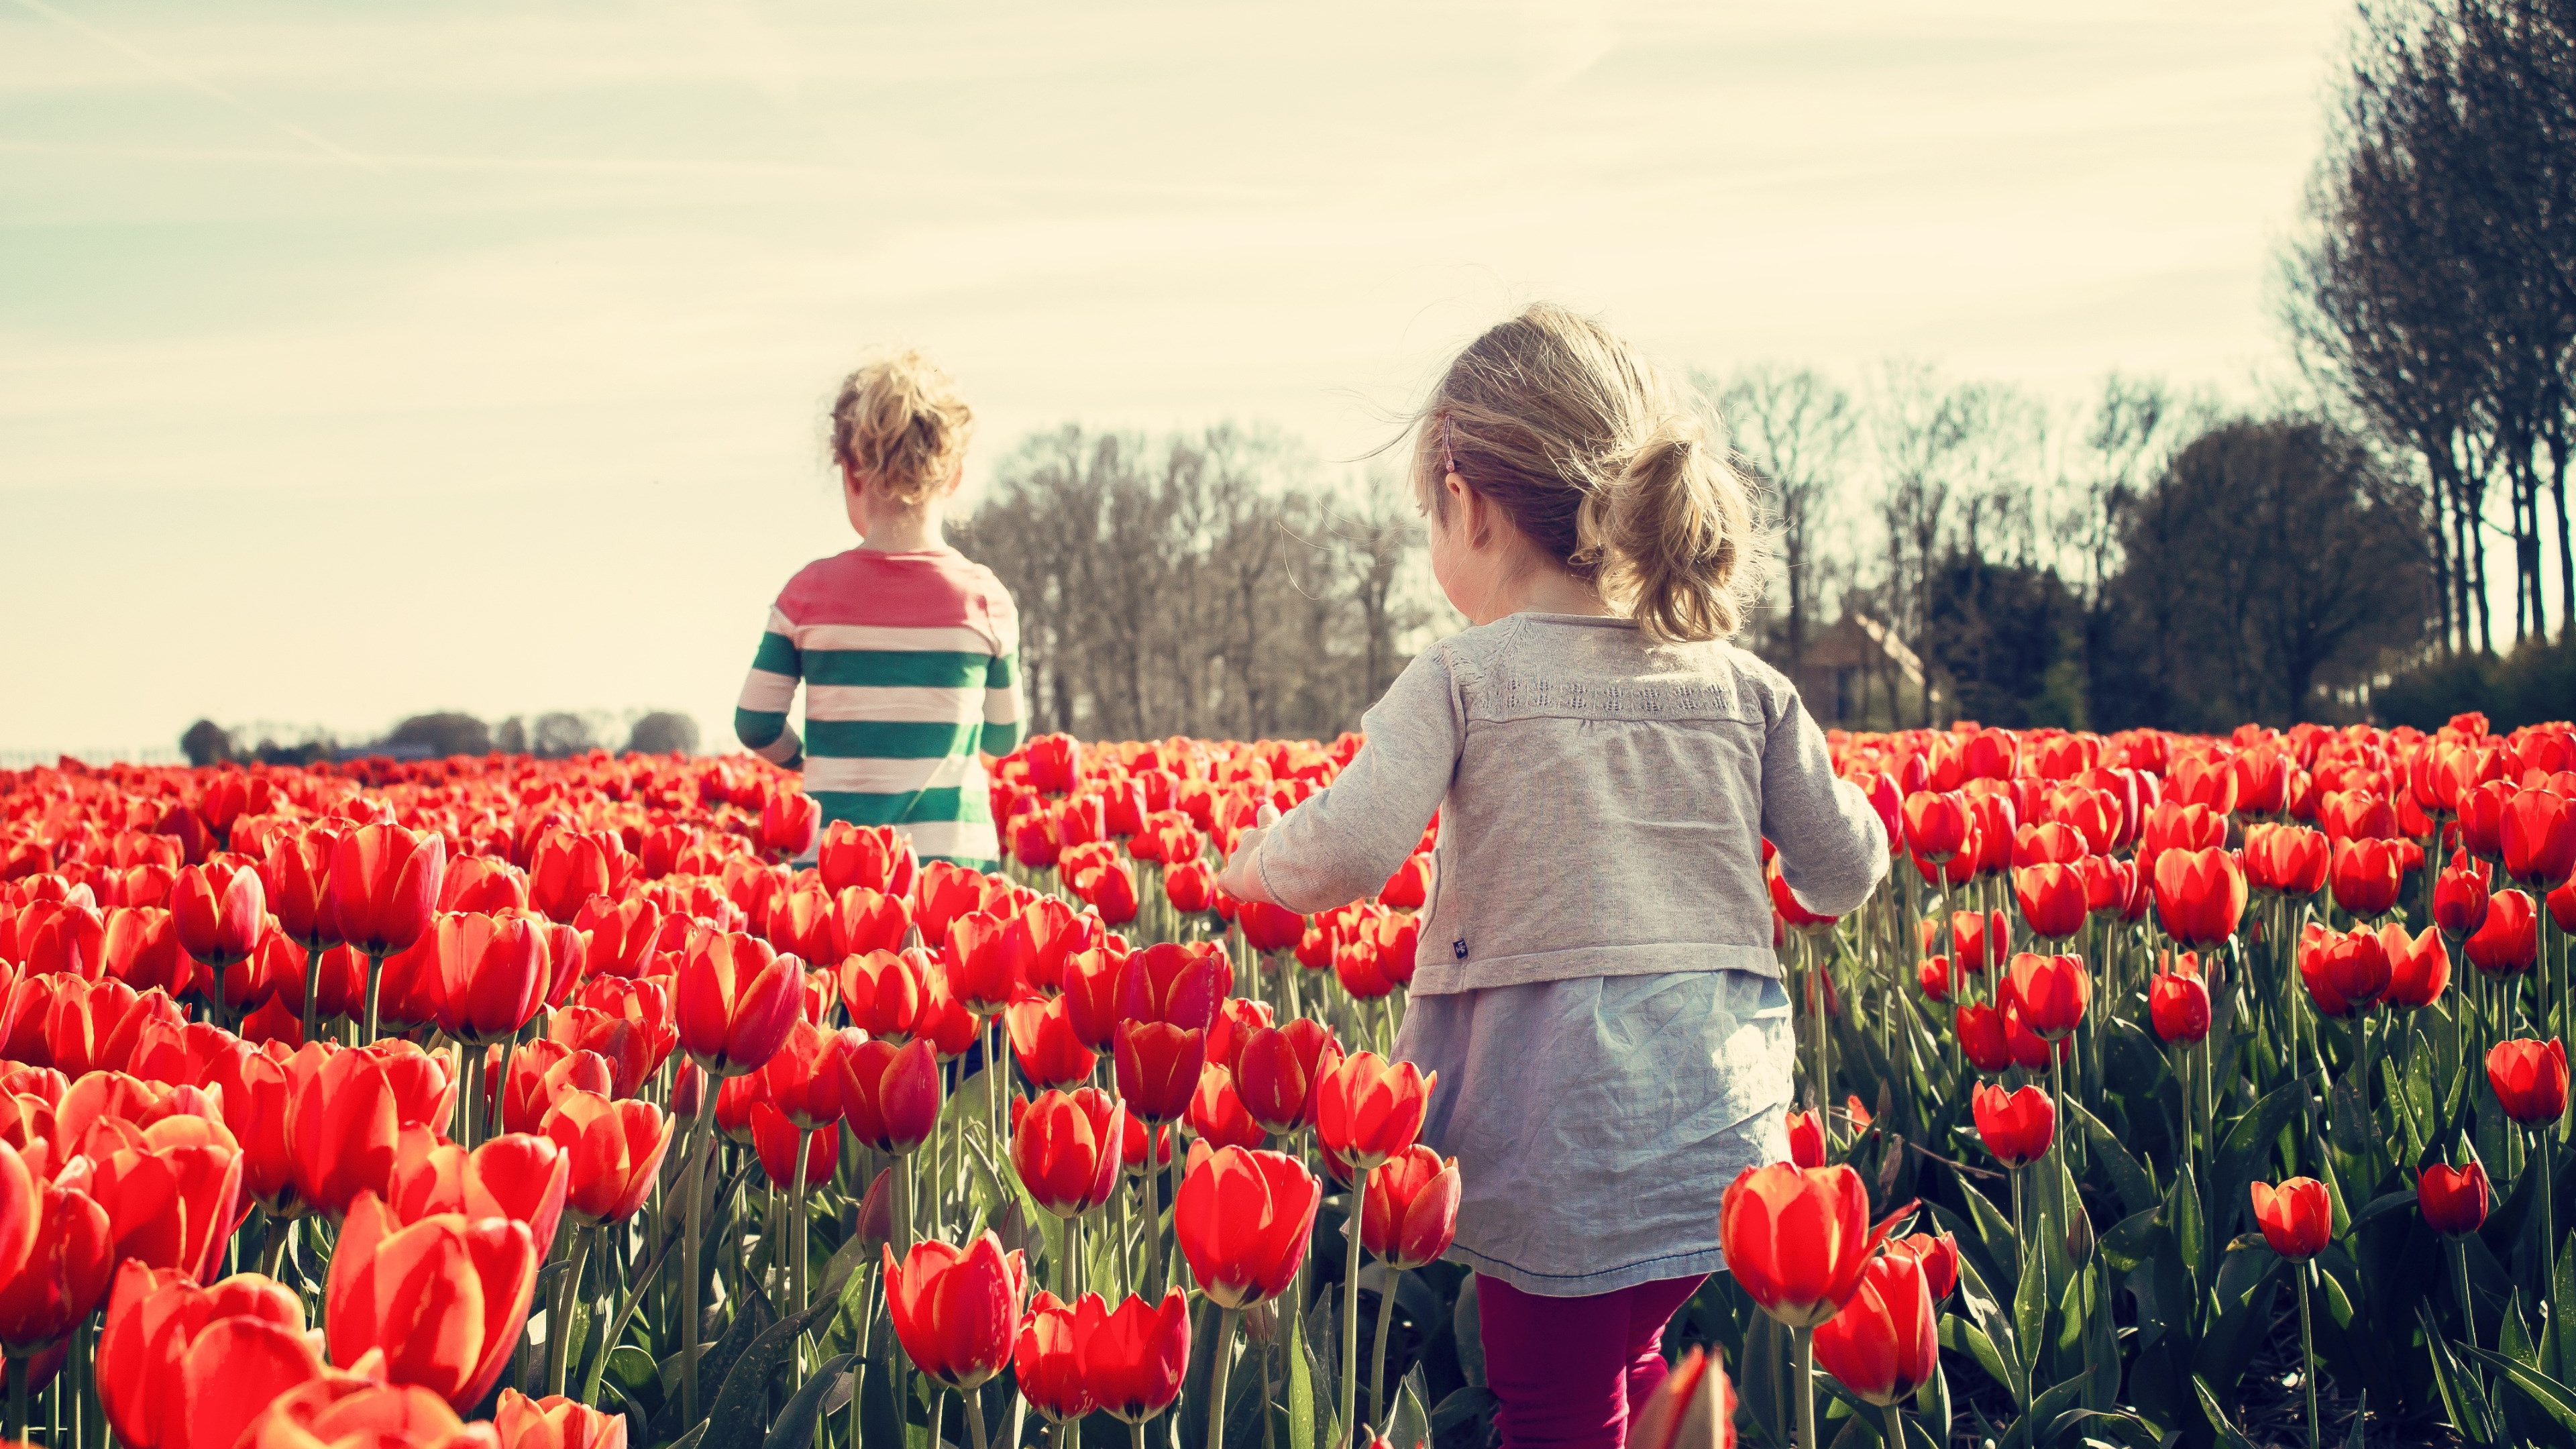 Children in the land with tulips wallpaper 3840x2160